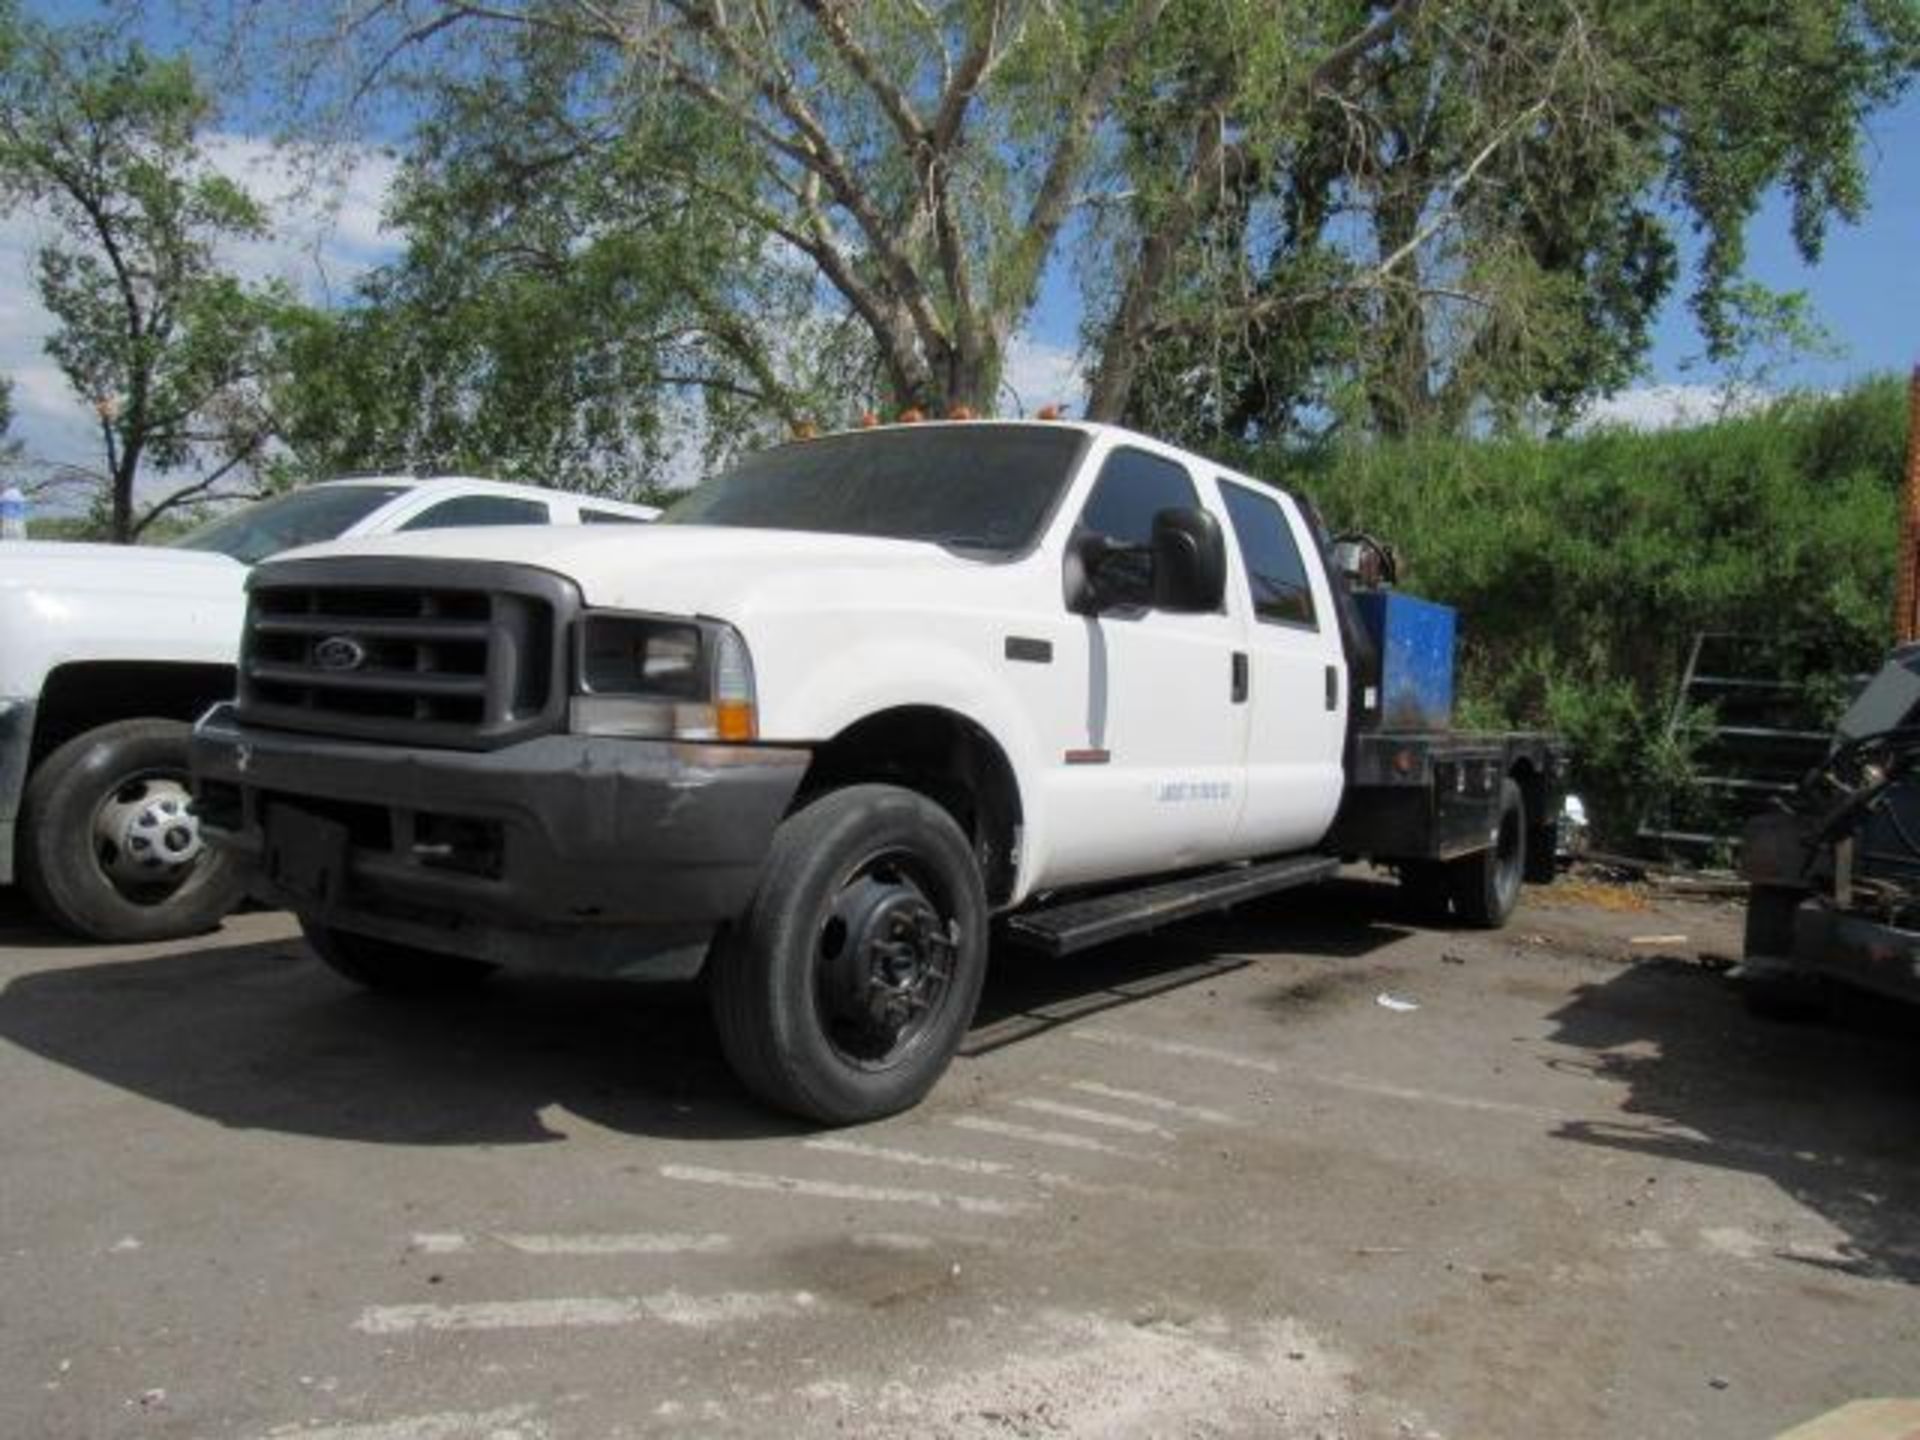 2004 Ford F550 11 ft. Flatbed Superduty 4 x 4, VIN # 1FDAW57PX4EB03420, Crew Cab, Goose Neck